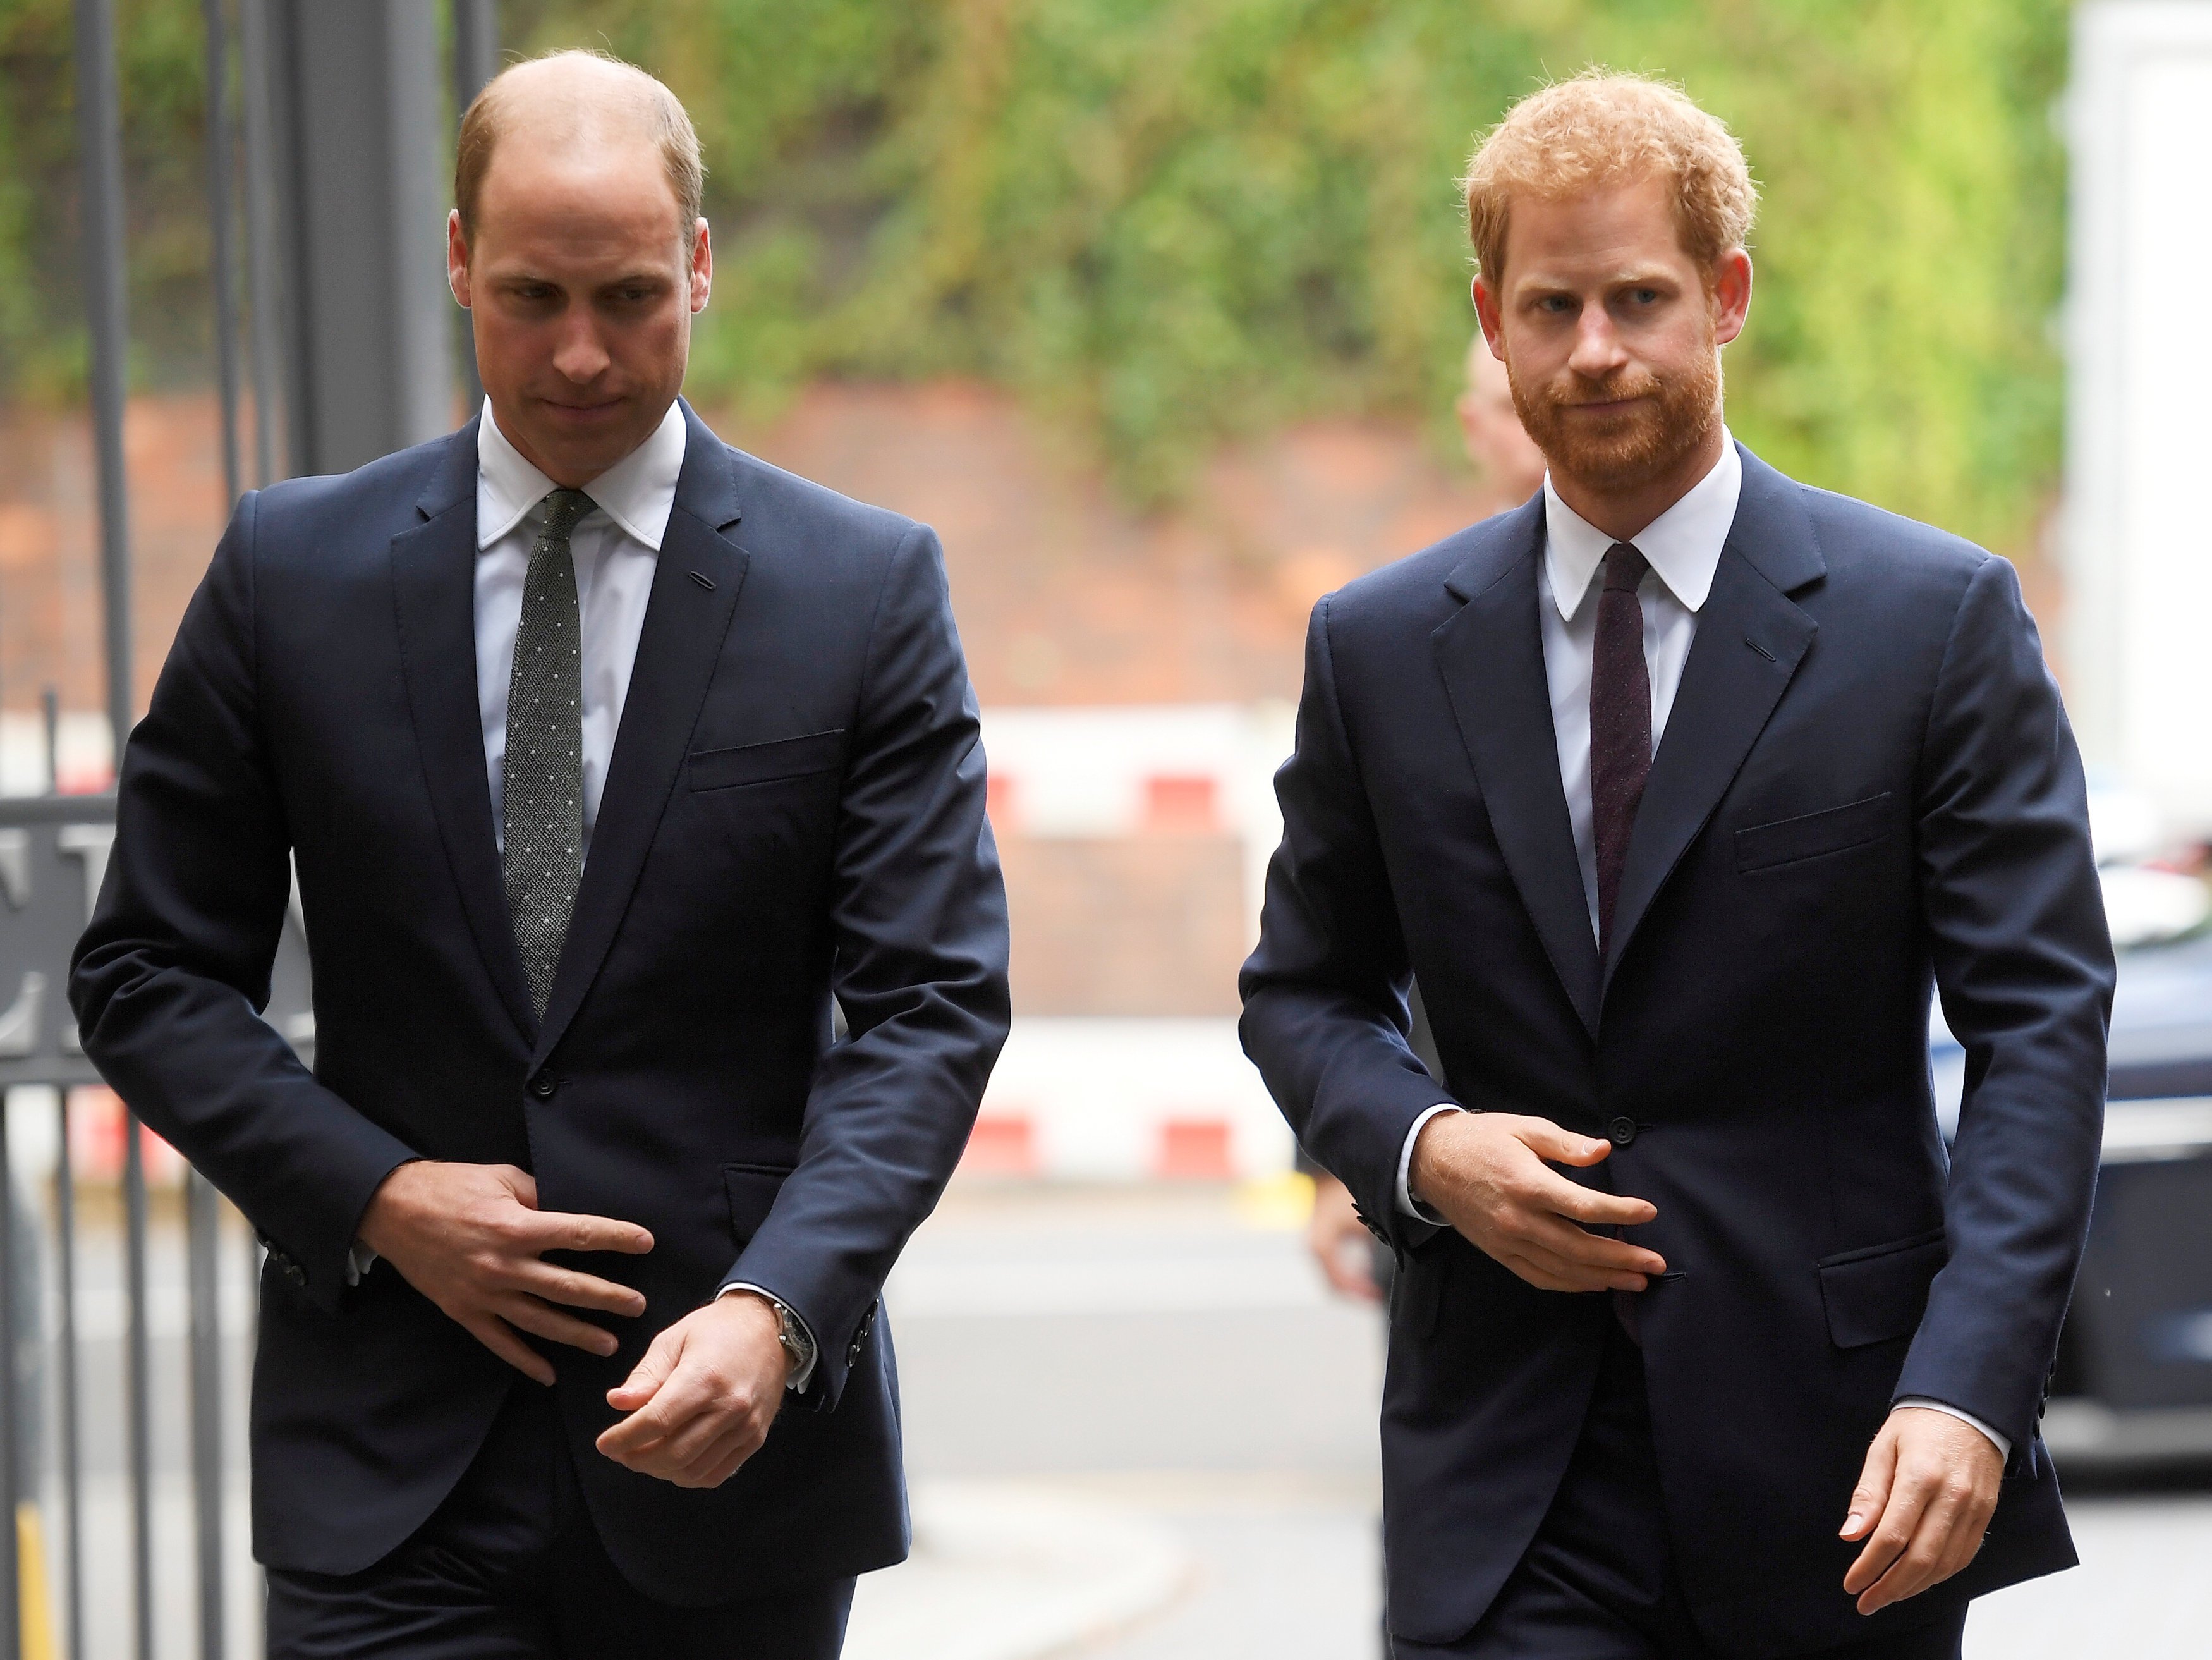 Prince Harry and Prince William pictured visiting the Support4Grenfell Community Hub in London, 2017, England. | Photo: Getty Images